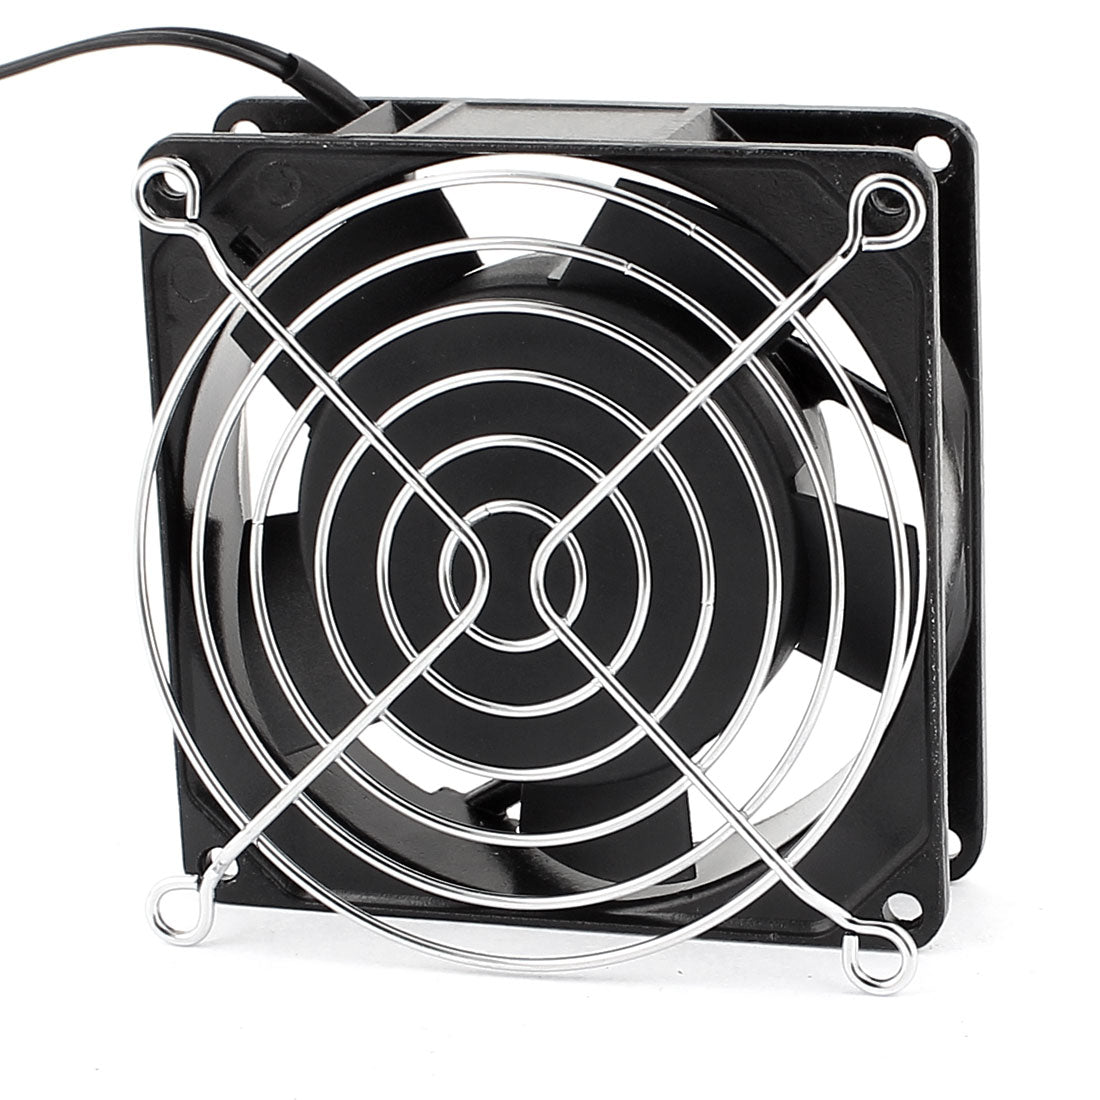 Uxcell Uxcell 92 x 92 x 26mm 220V-240V 0.07A PC CPU Computer Cooling Fan W Metal Mesh